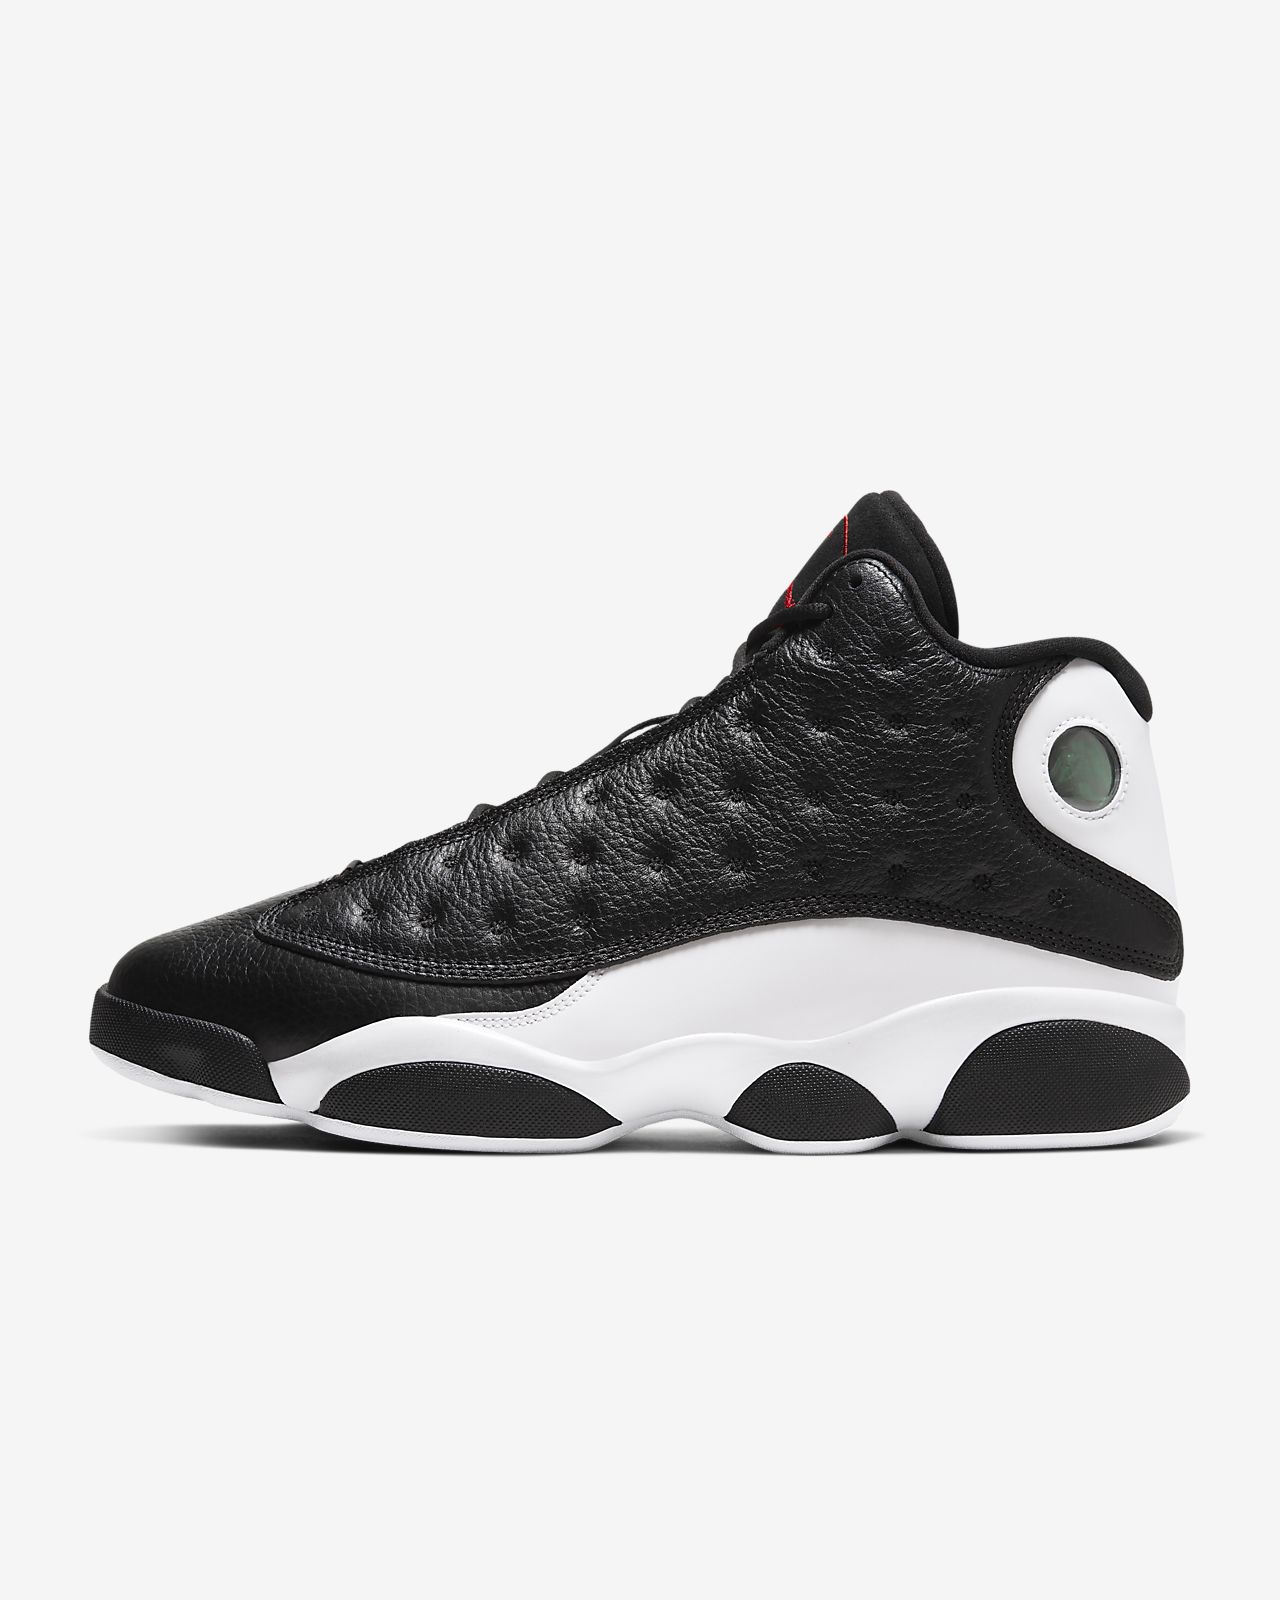 jordan 13s that just came out